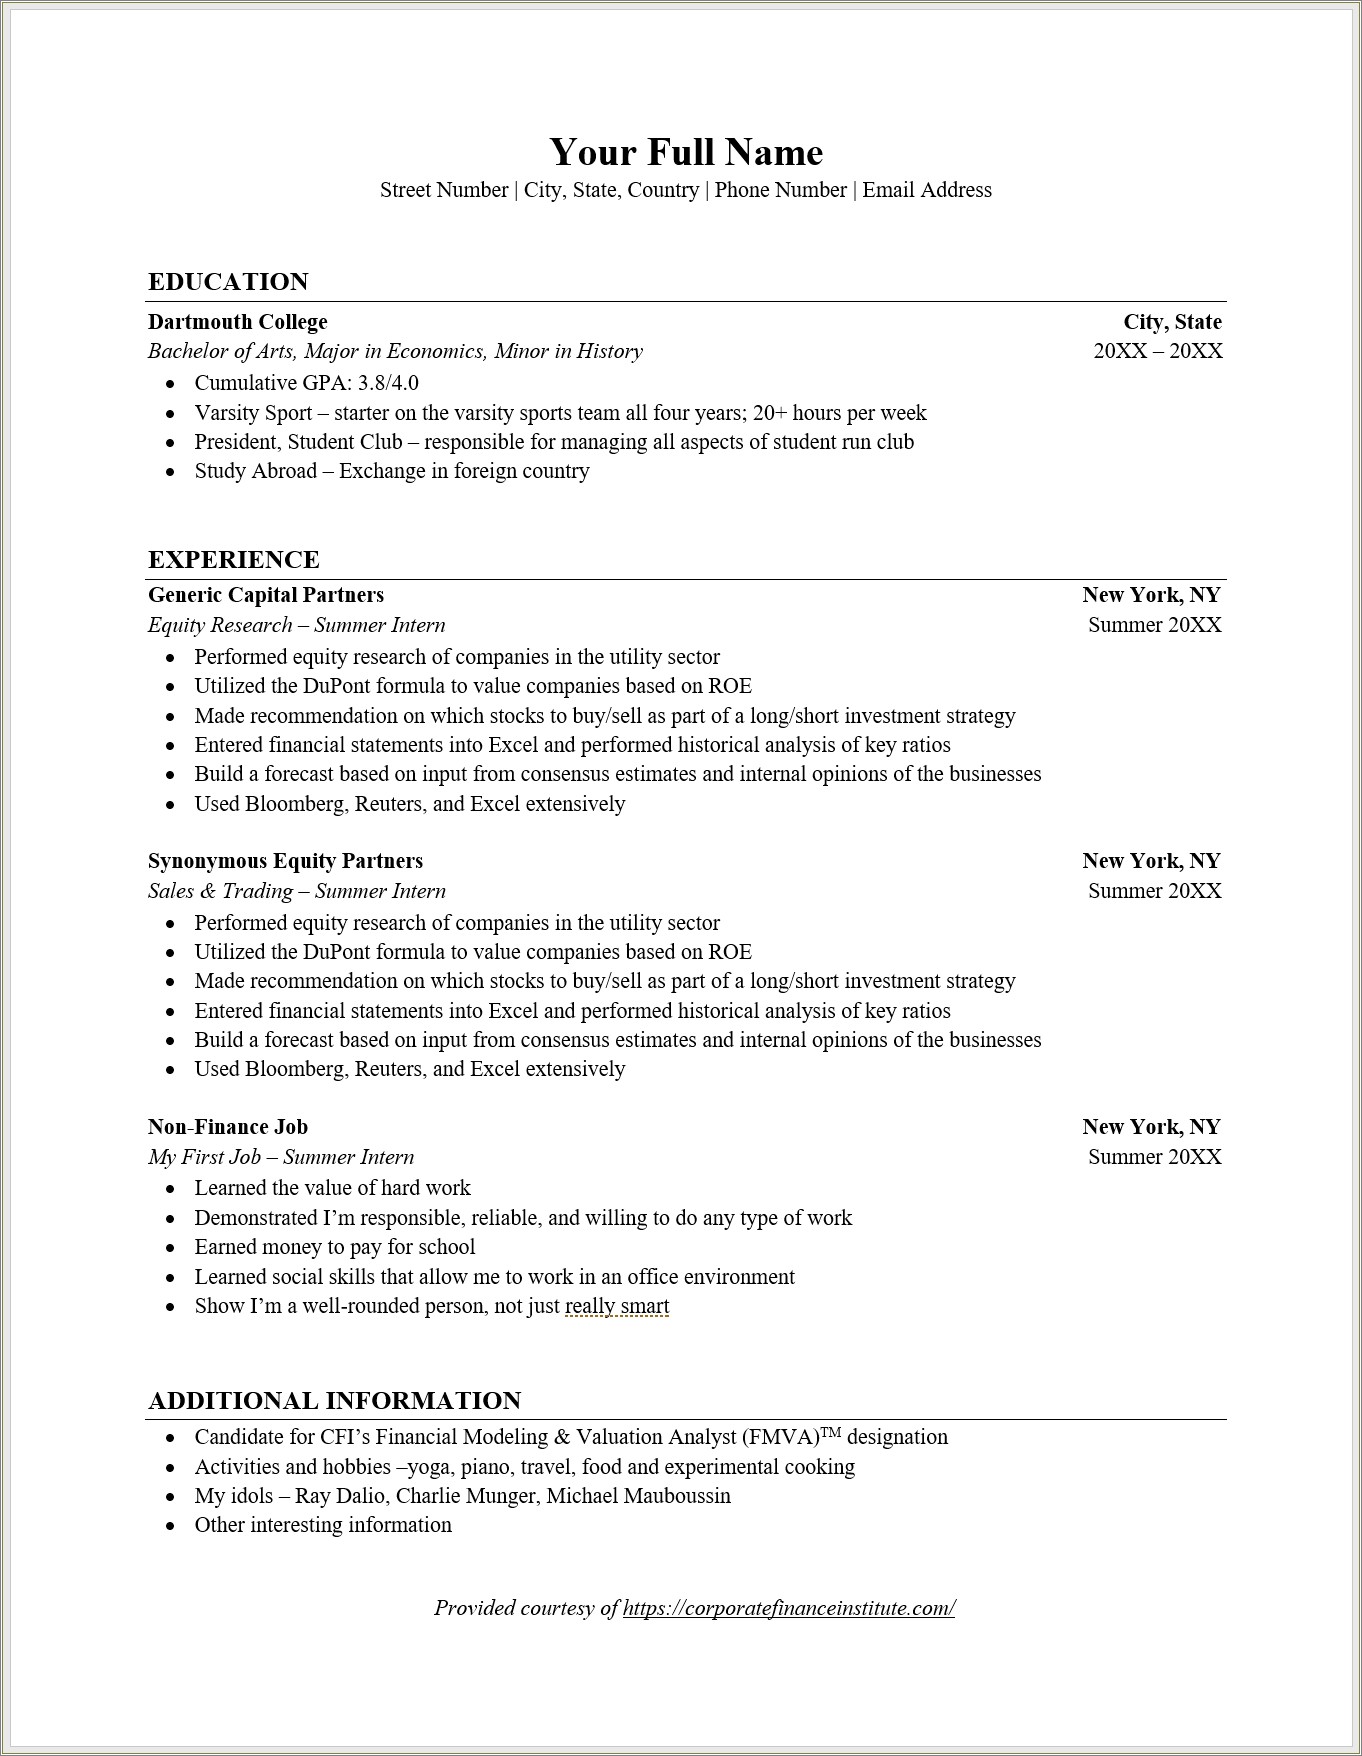 Examples Of Additional Information On A Resume